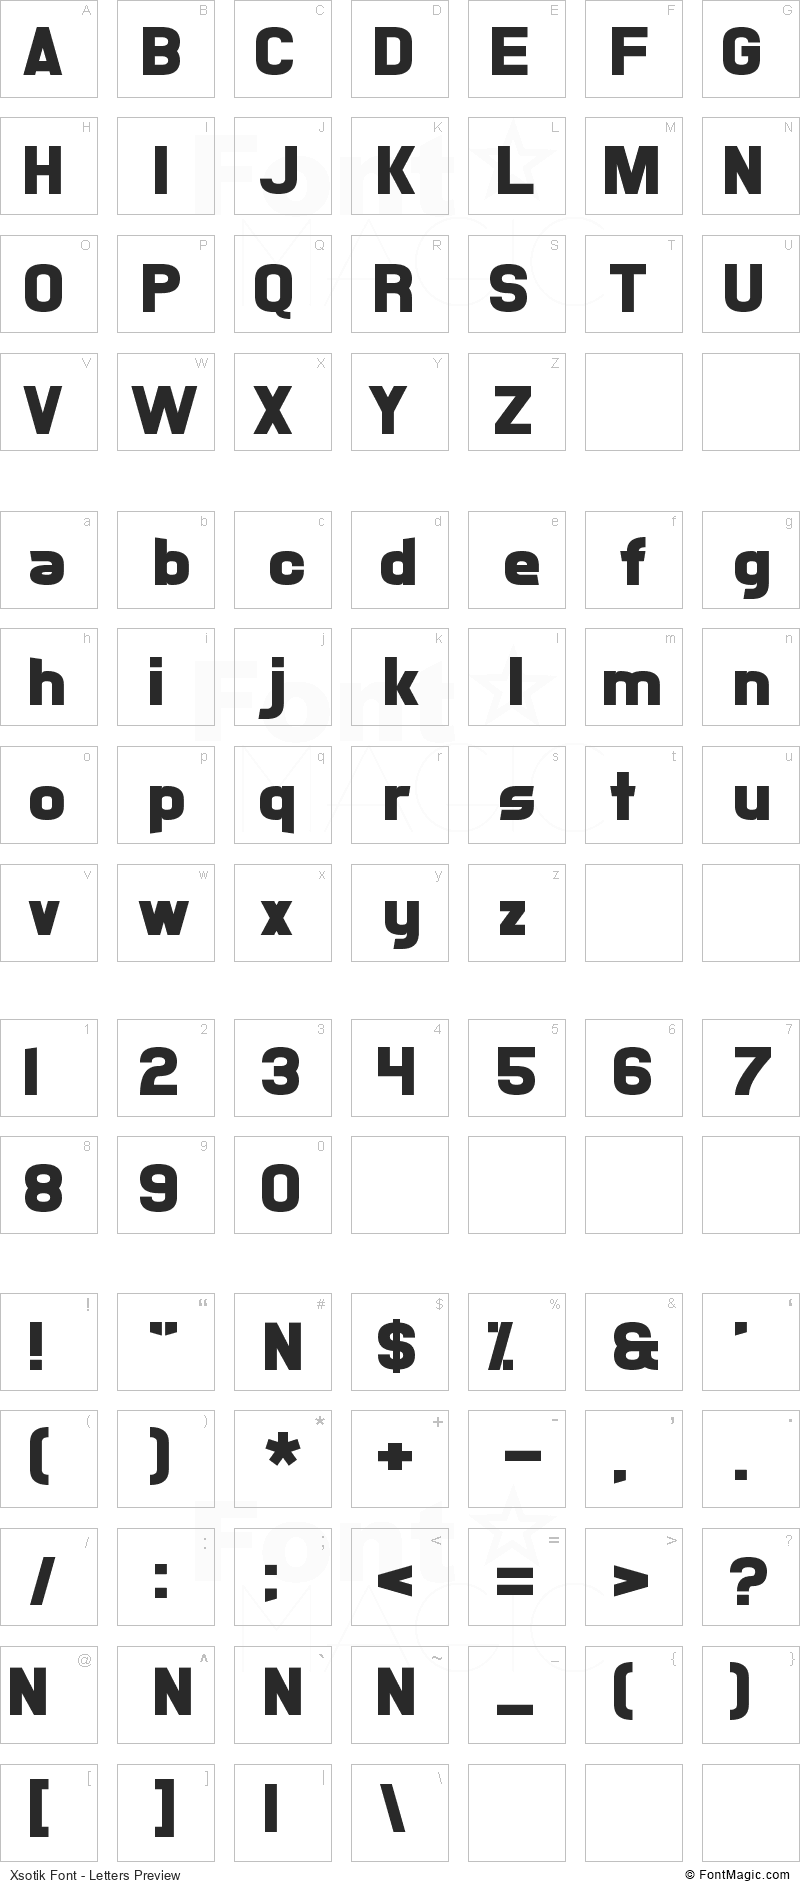 Xsotik Font - All Latters Preview Chart